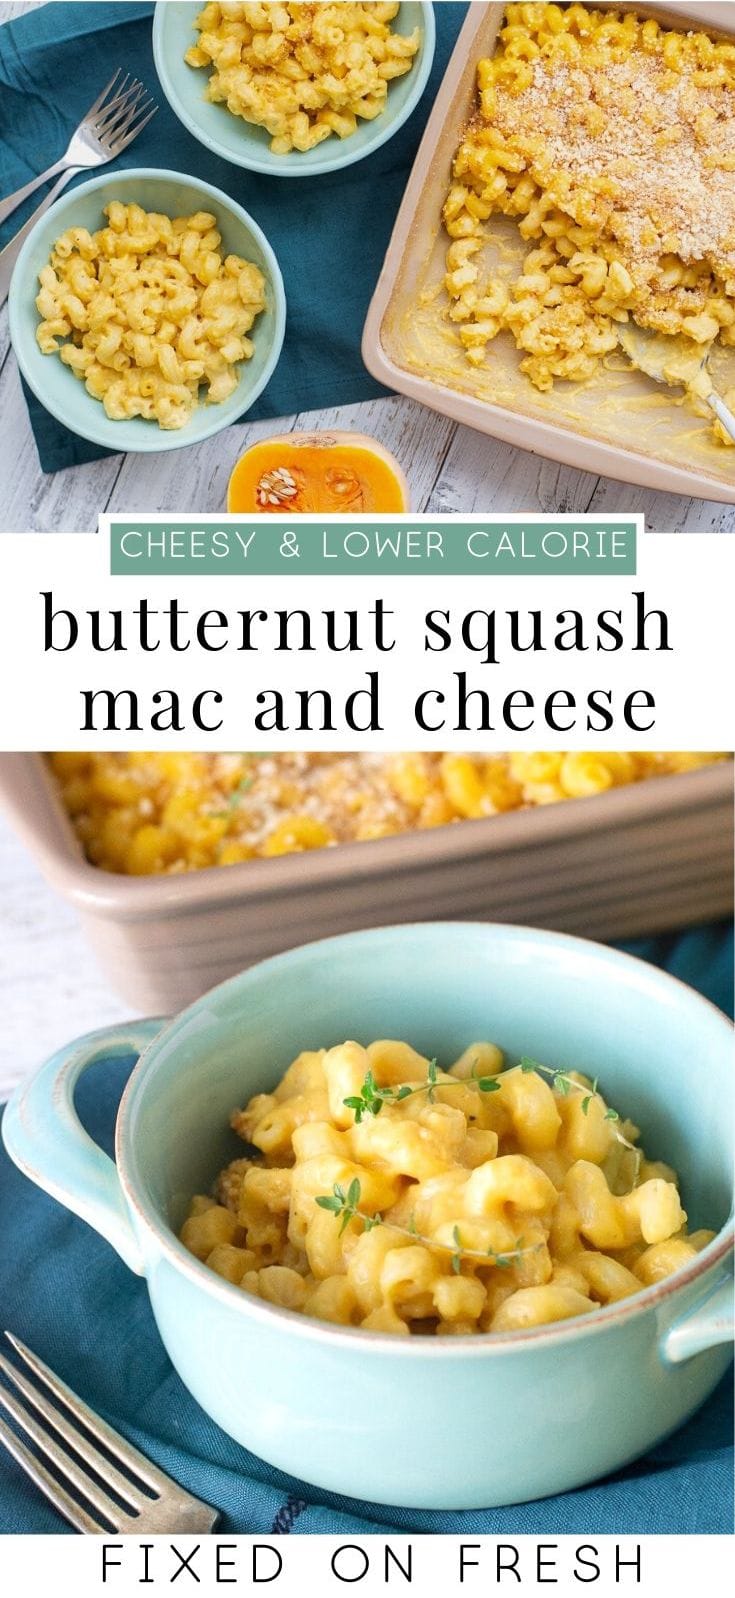 If you're looking for a cheesy baked mac and cheese with a healthy twist, check out butternut squash macaroni and cheese. Delicious with fewer calories because of the butternut squash! #thanksgivingrecipe #cheese